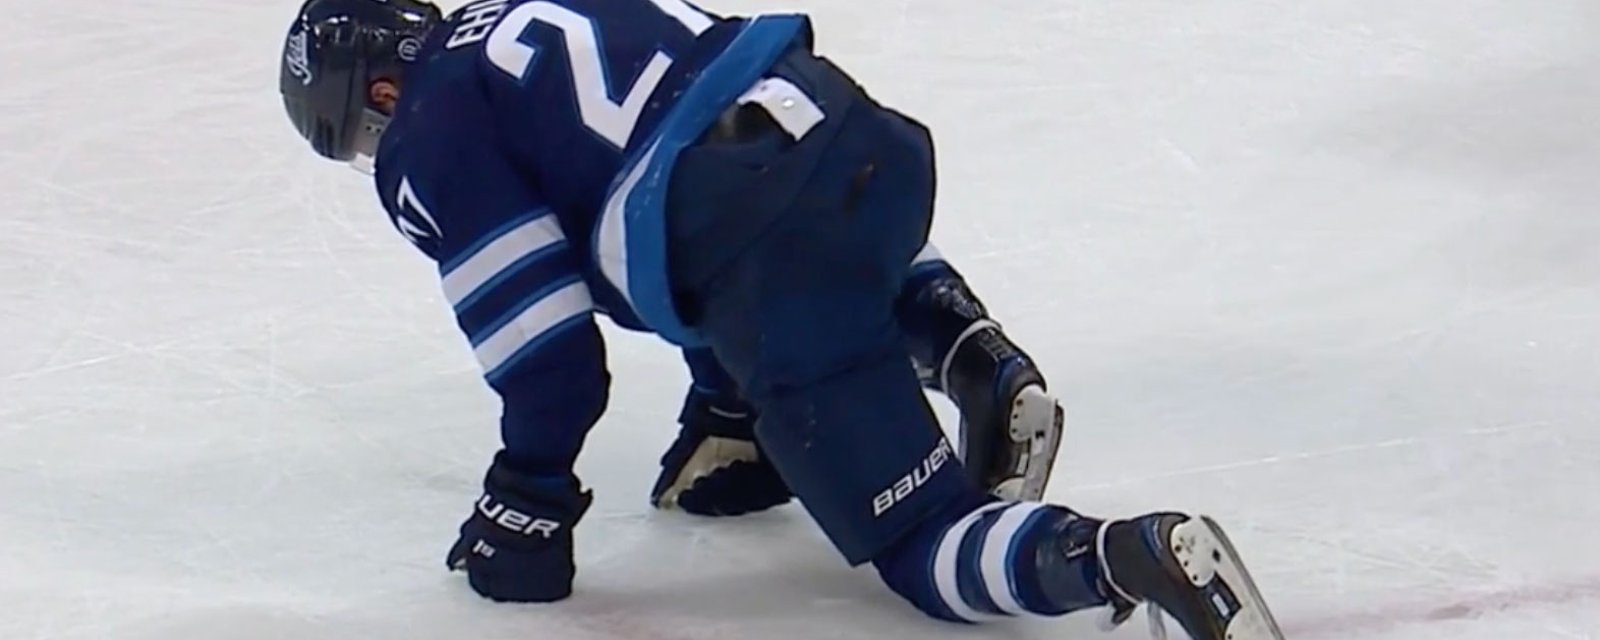 Ehlers collapses in pain on the ice but stays on to help the Jets 